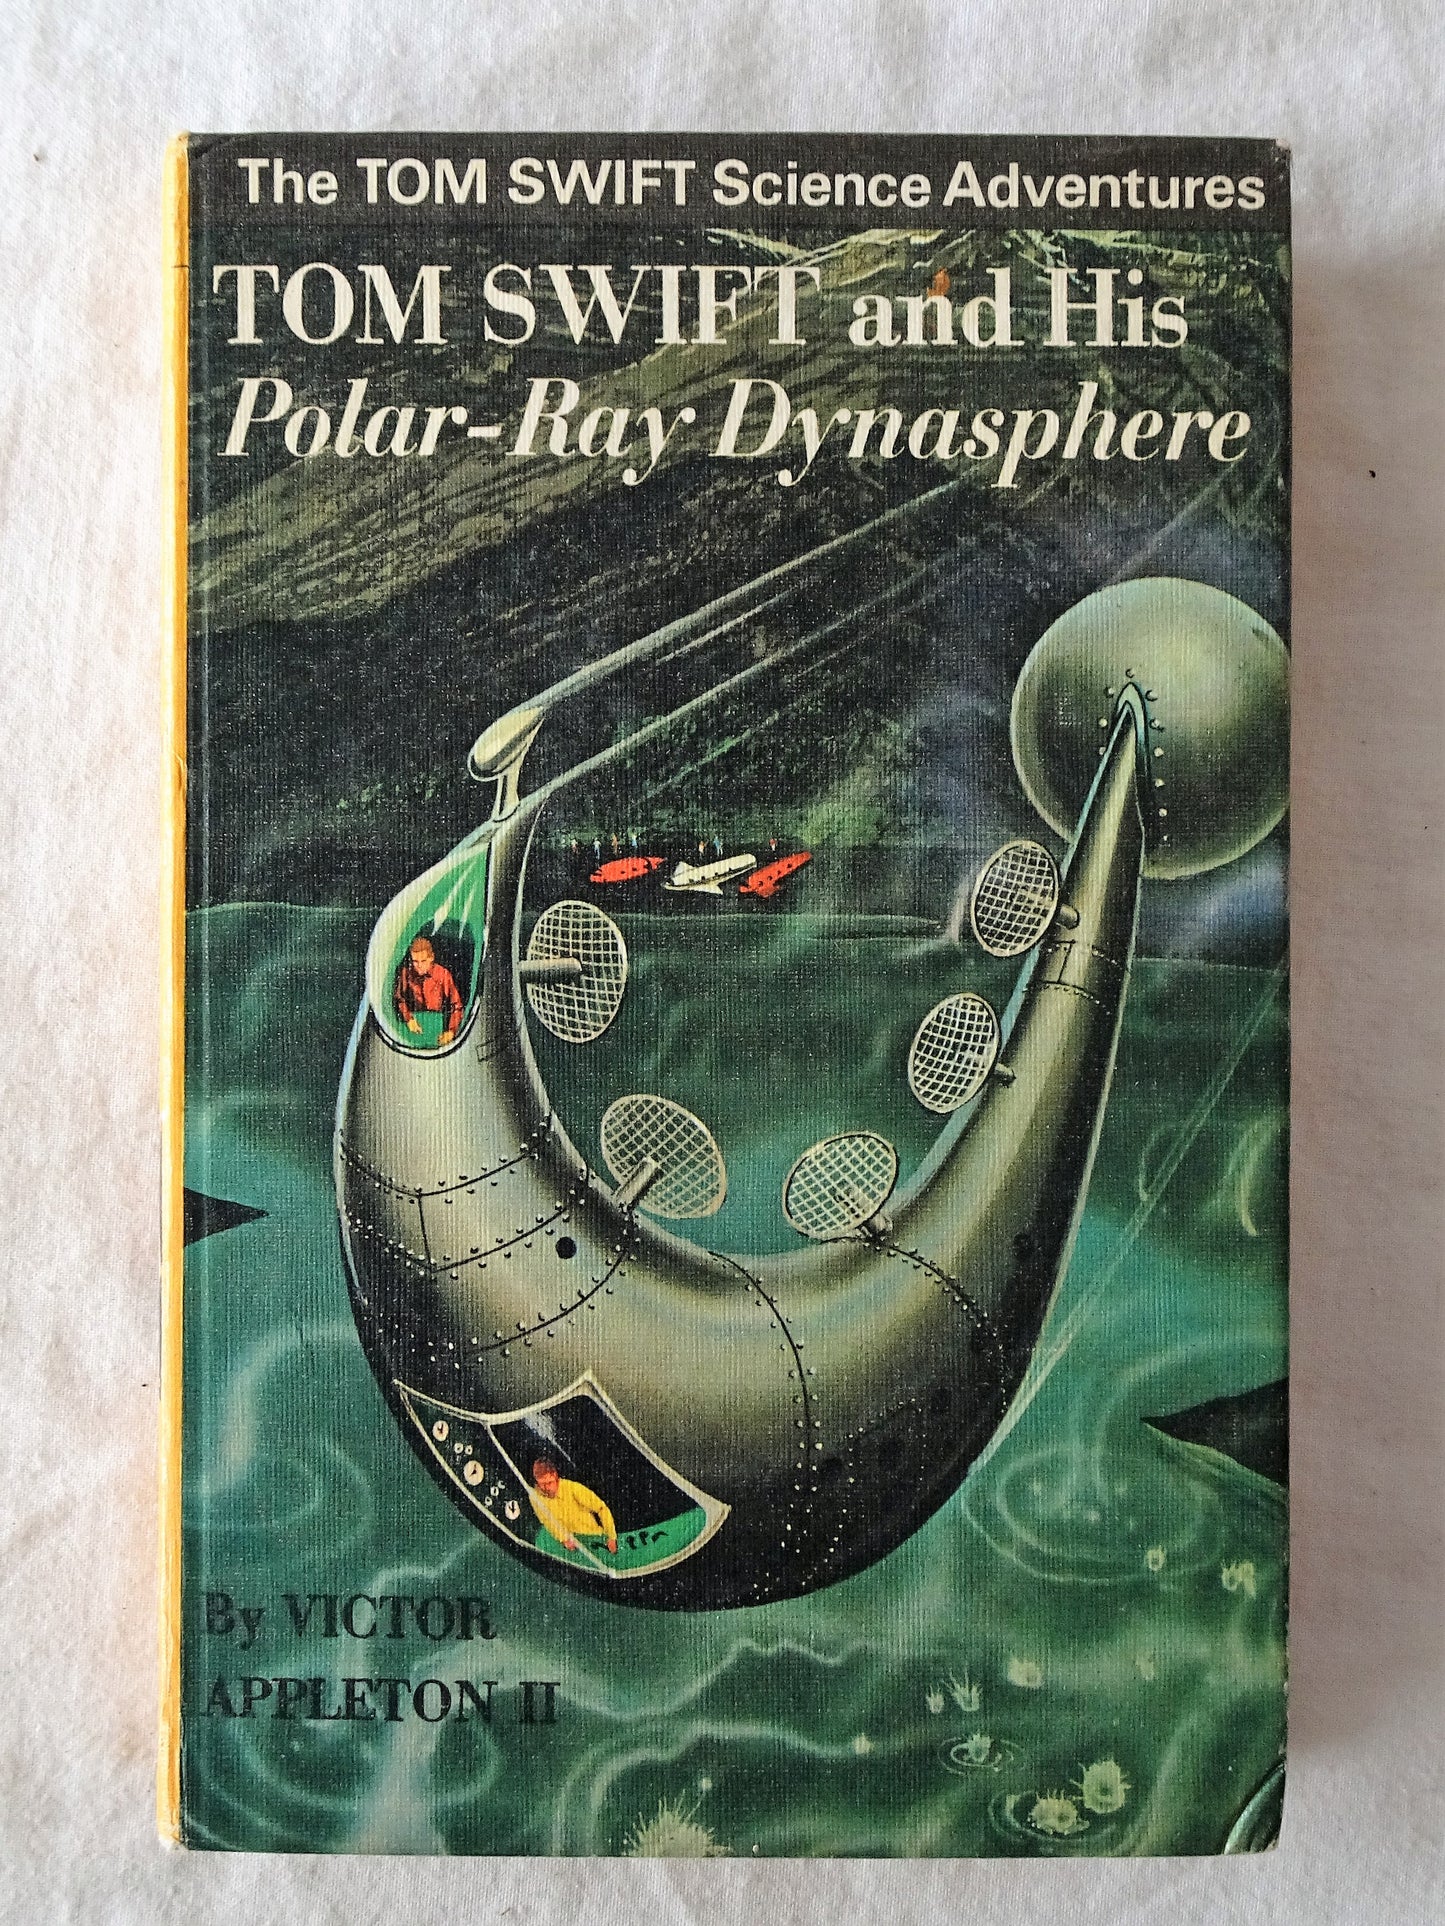 Tom Swift and His Polar-Ray Dynasphere by Victor Appleton II